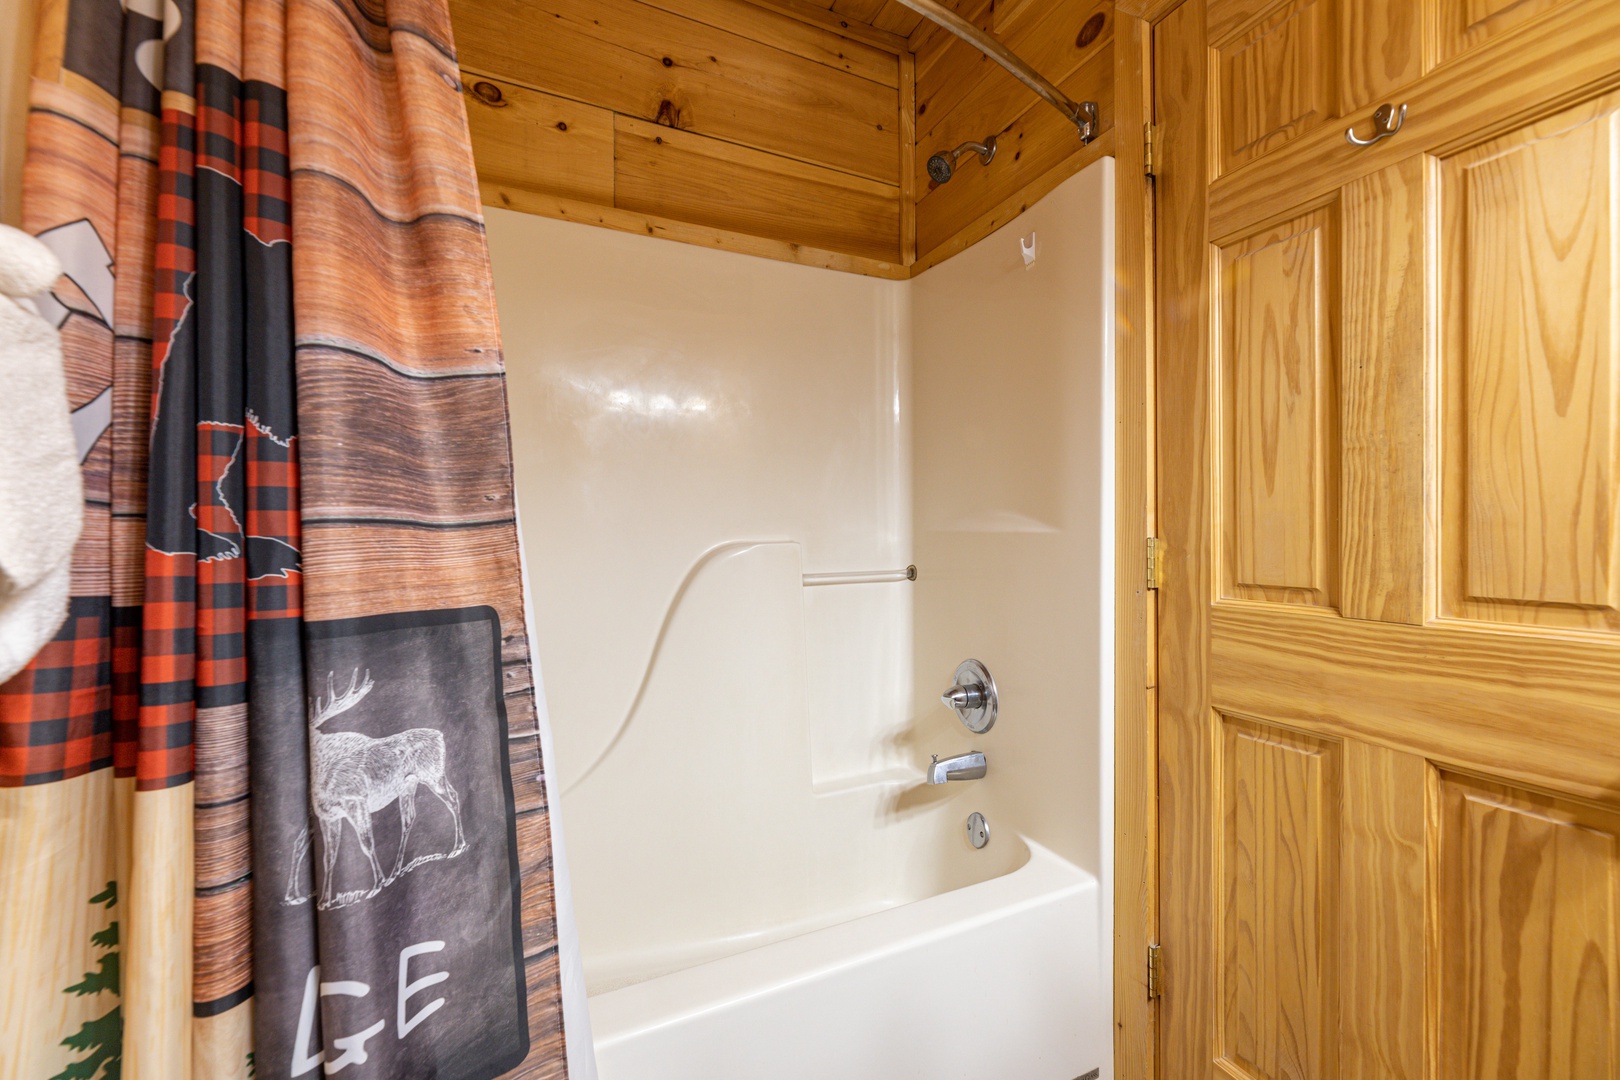 Bathroom with a tub and shower at Absolutely Wonderful, a 2 bedroom cabin rental located in Pigeon Forge